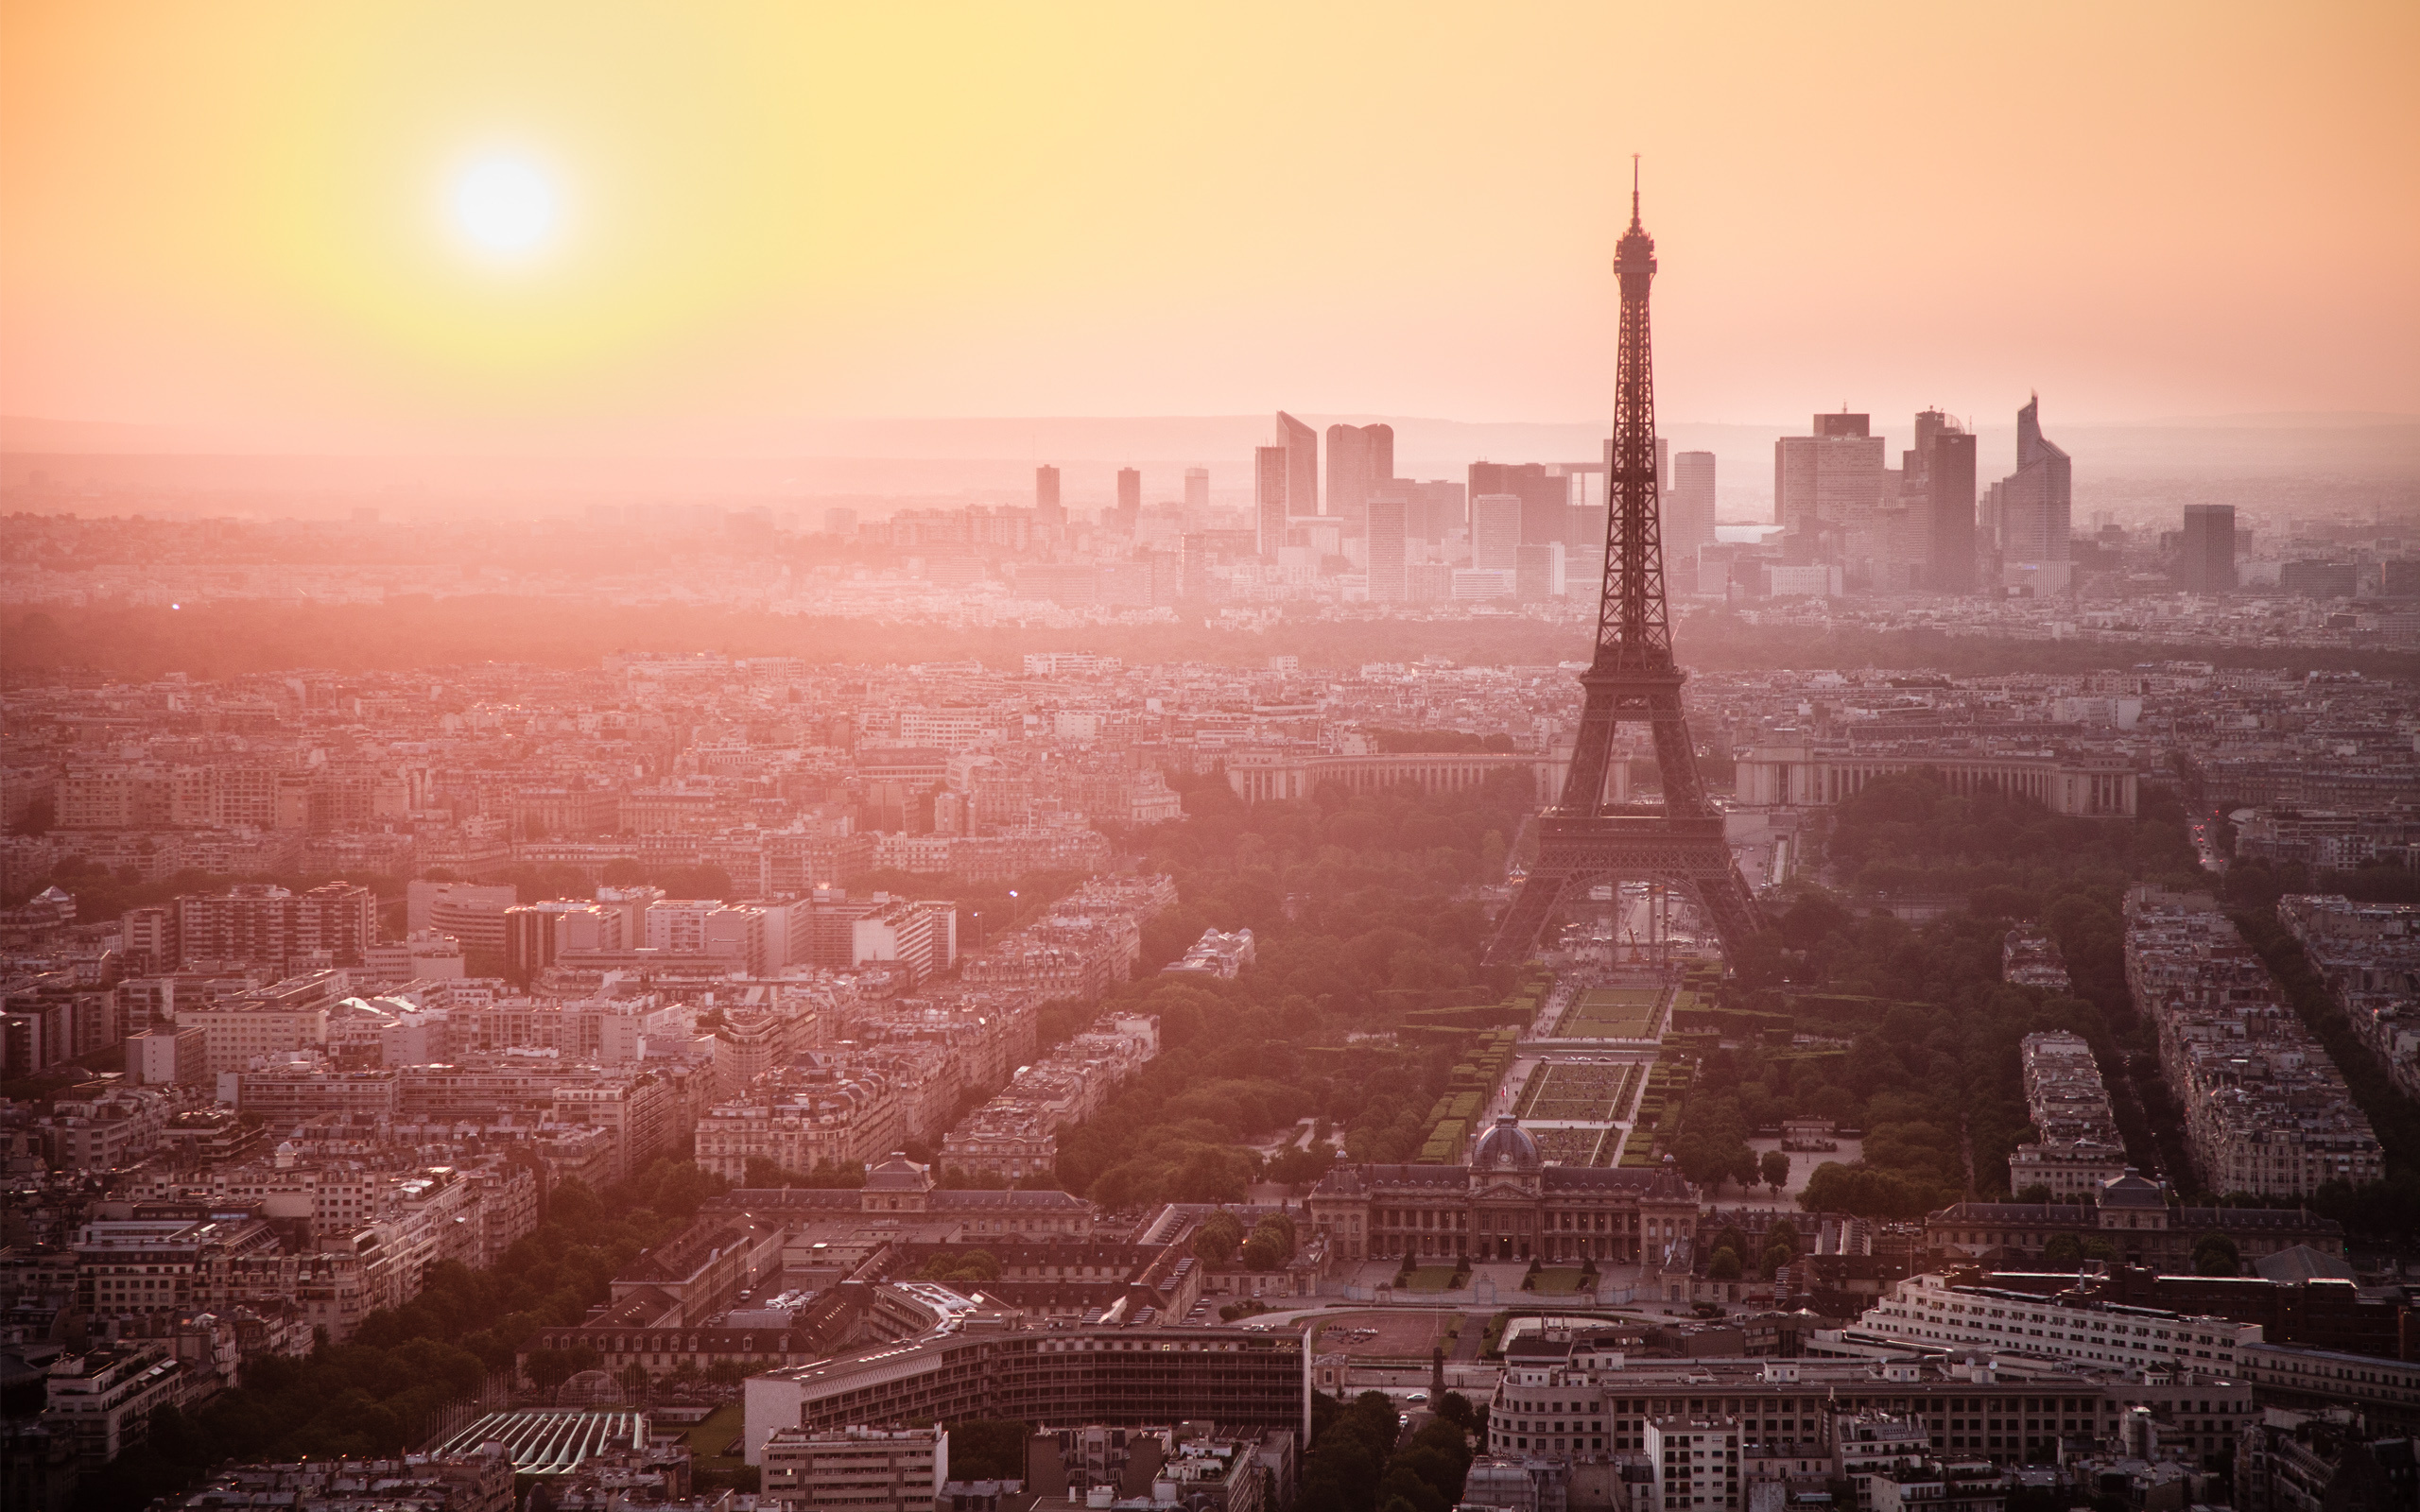 Paris: The fourth largest municipality in the European Union, following Berlin, Madrid, and Rome. 2560x1600 HD Wallpaper.